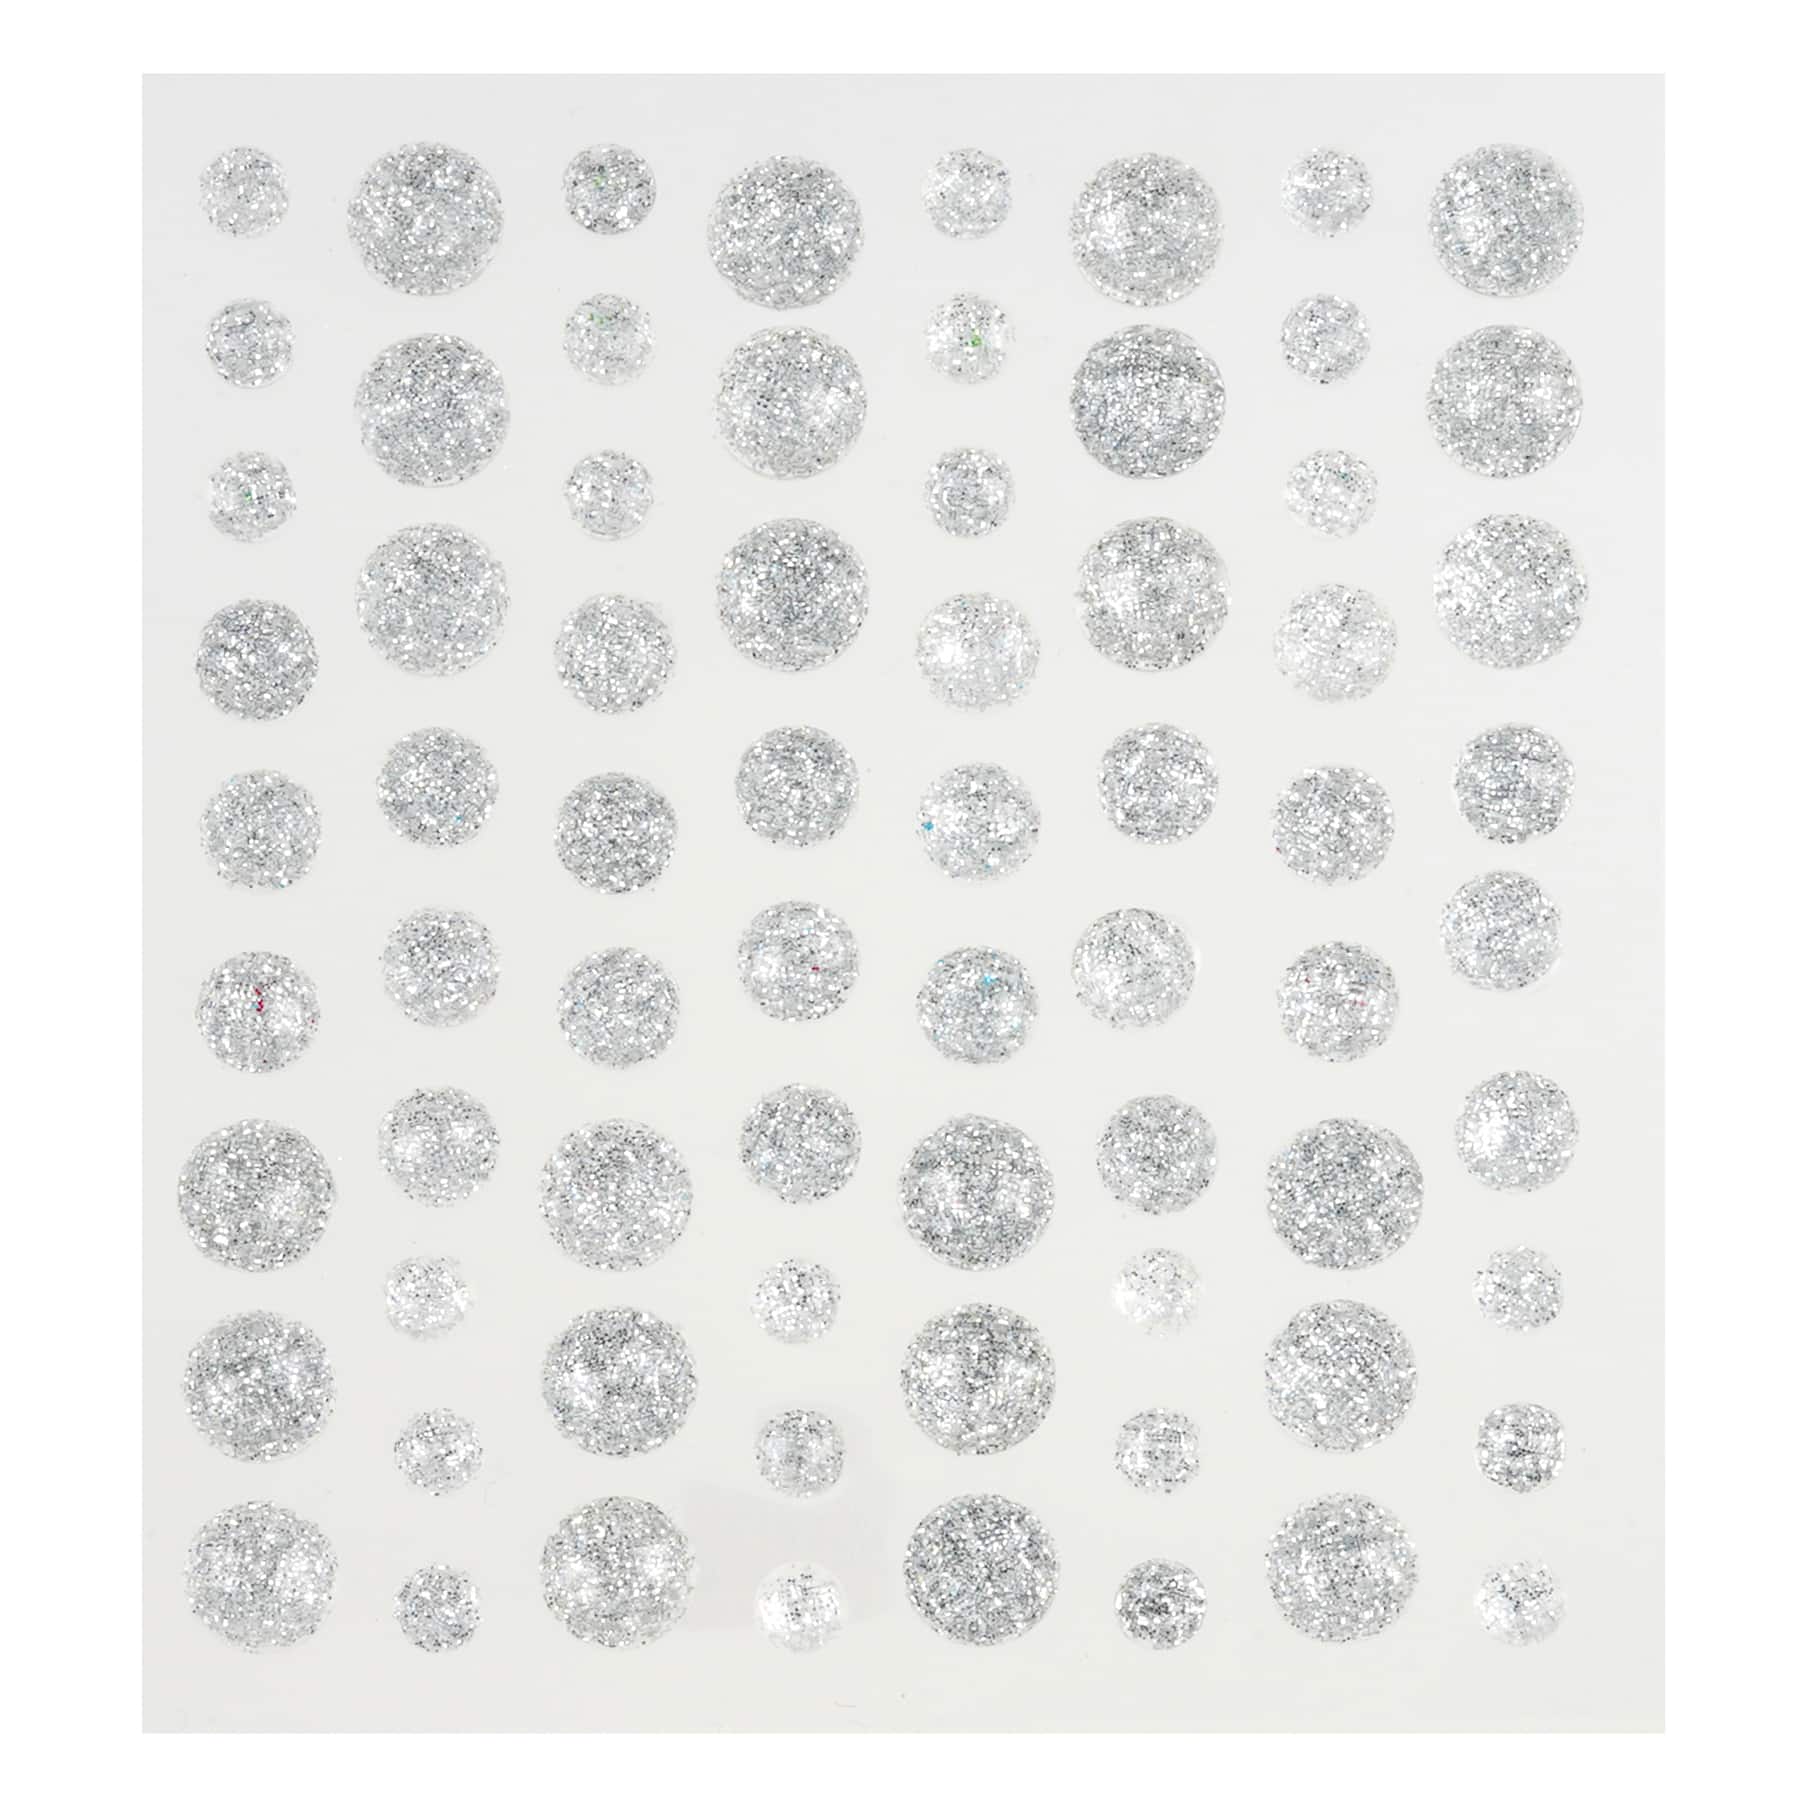 12 Packs: 72 ct. (864 total) Glitter Rhinestone Stickers by Recollections&#x2122;